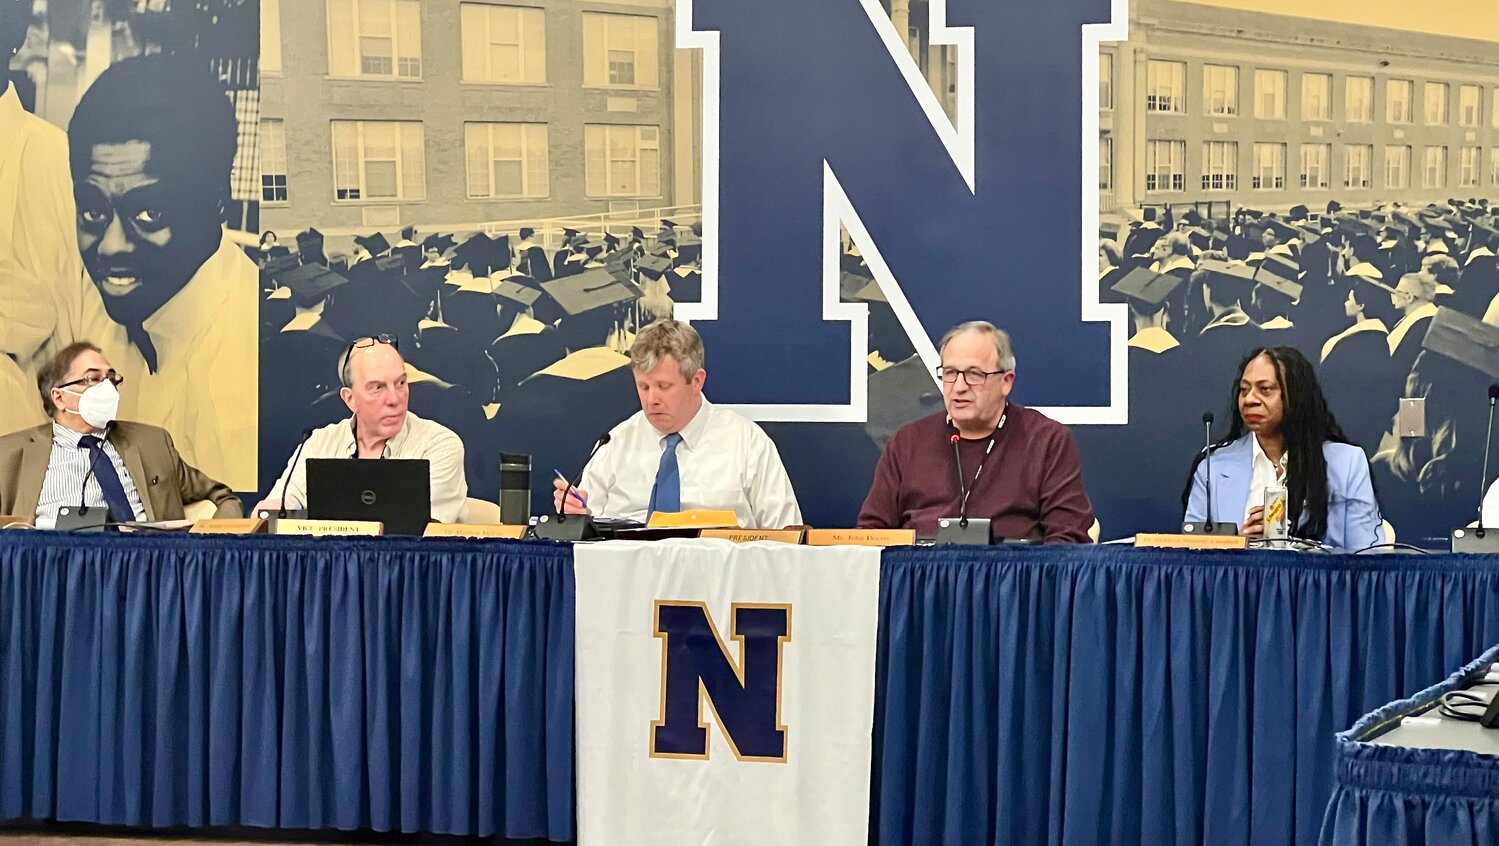 John Doerre [second from left] will serve as the Board of Education President until the next election cycle. Doerre succeeded Darren Stridiron who abruptly resigned with several other members on Friday, Feb. 2.